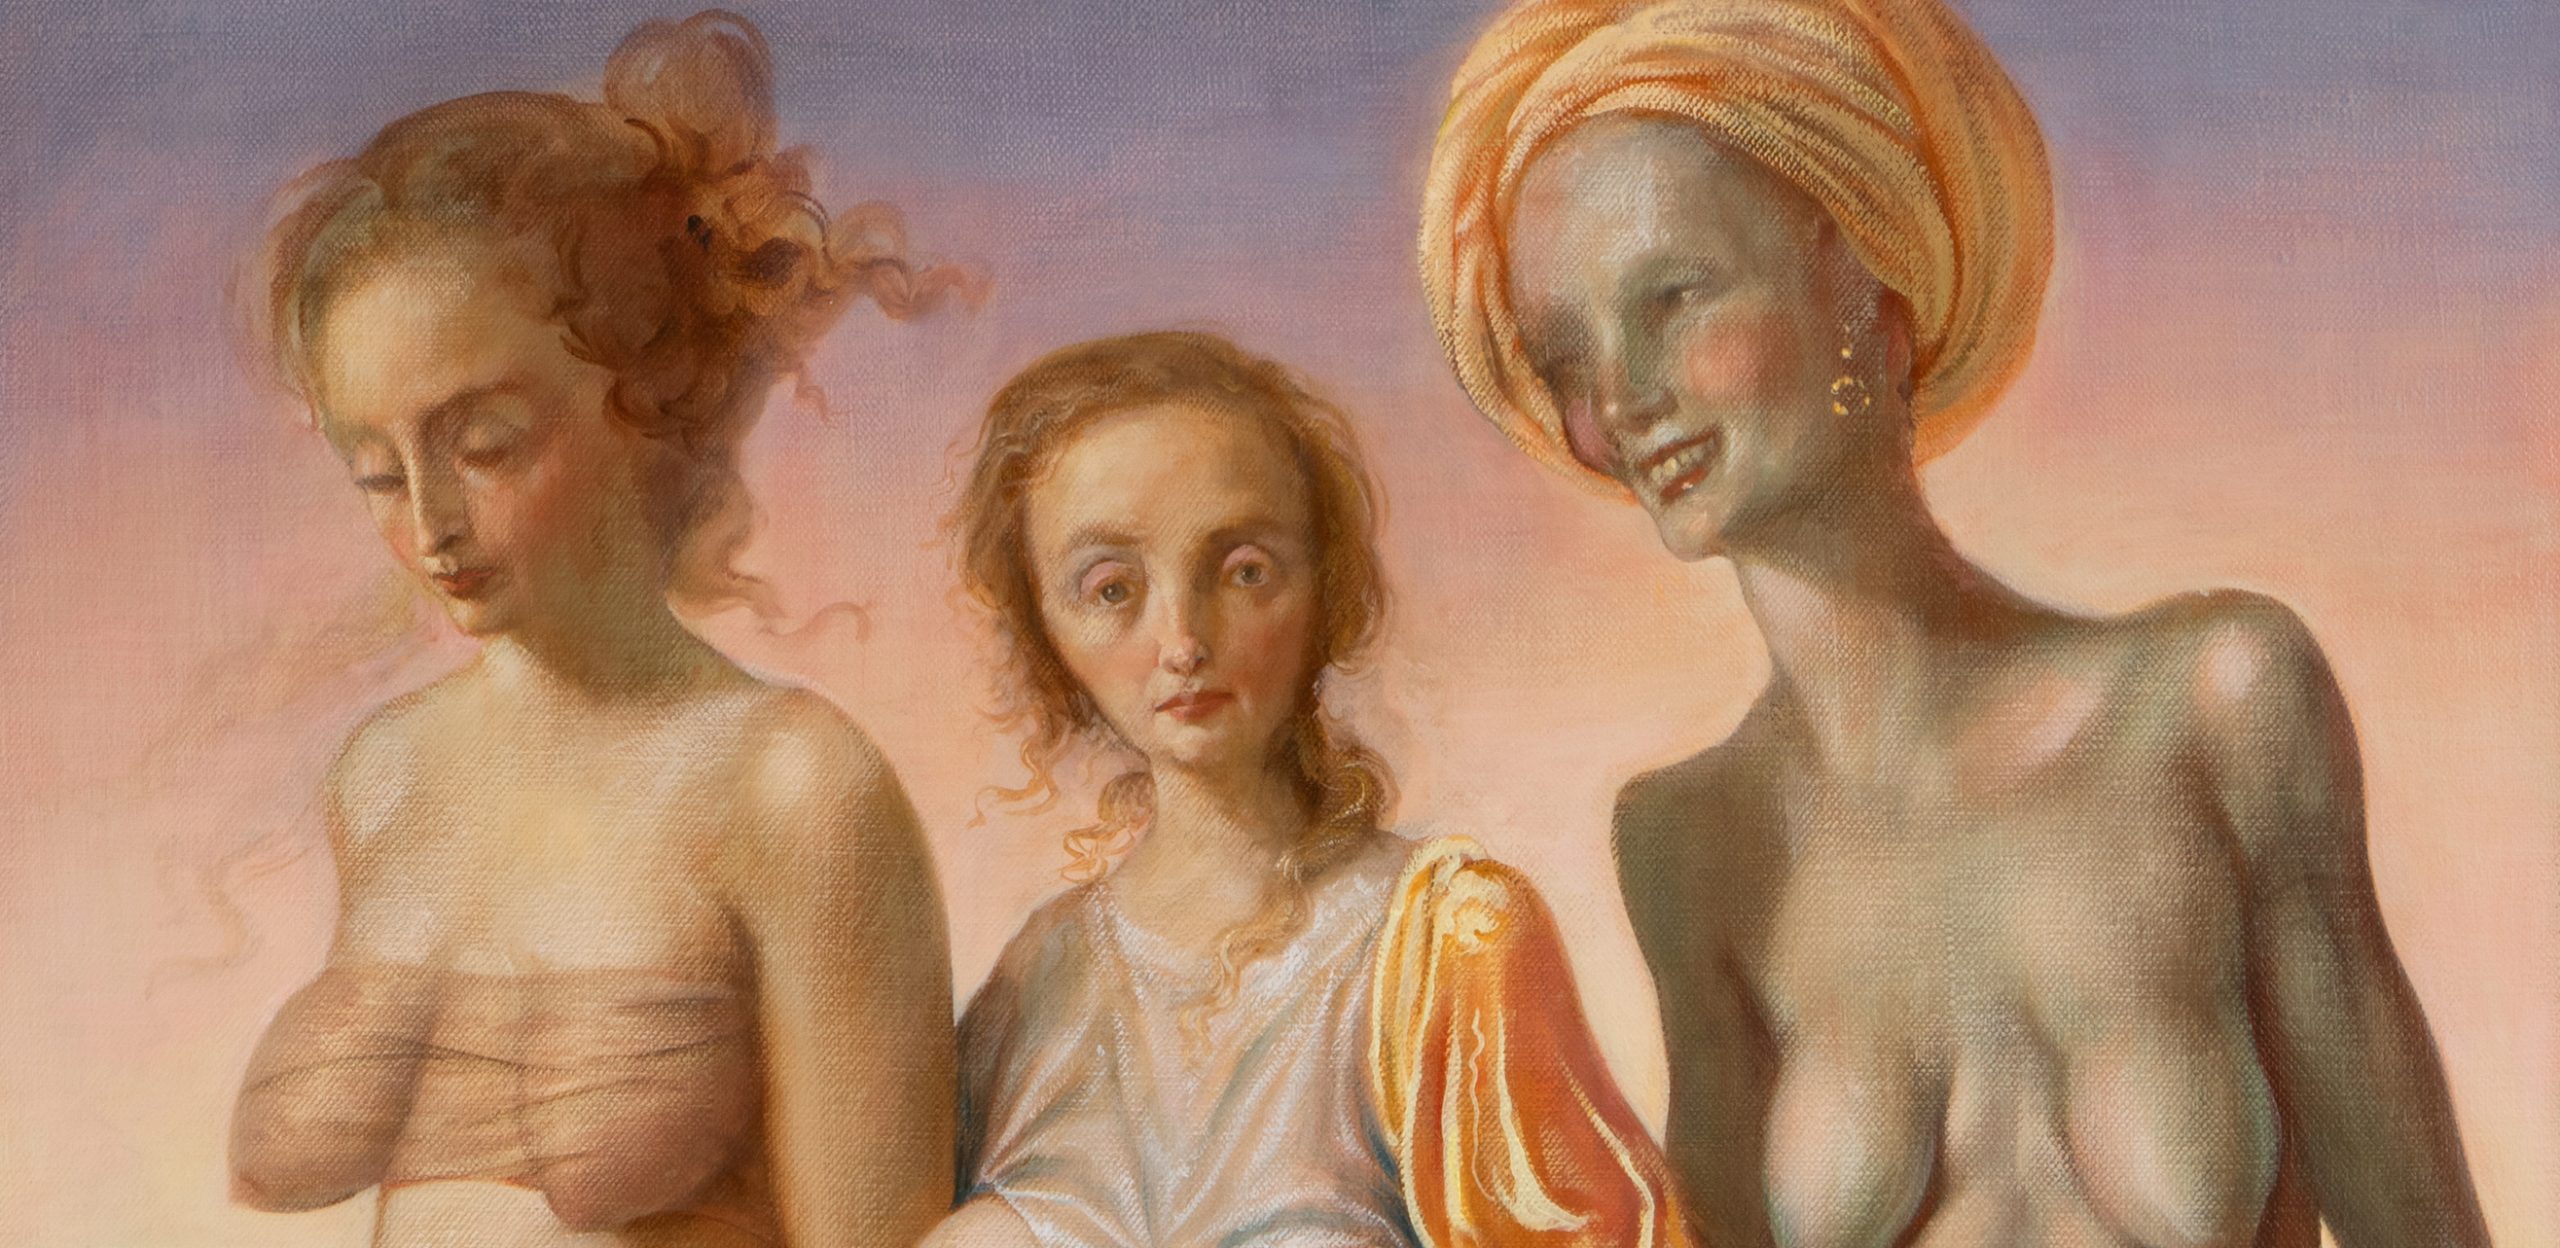 Simran Sex Video Hd - John Currin's Paintings Are Disgusting and Amoral. That's Why They're So  Good - ArtReview